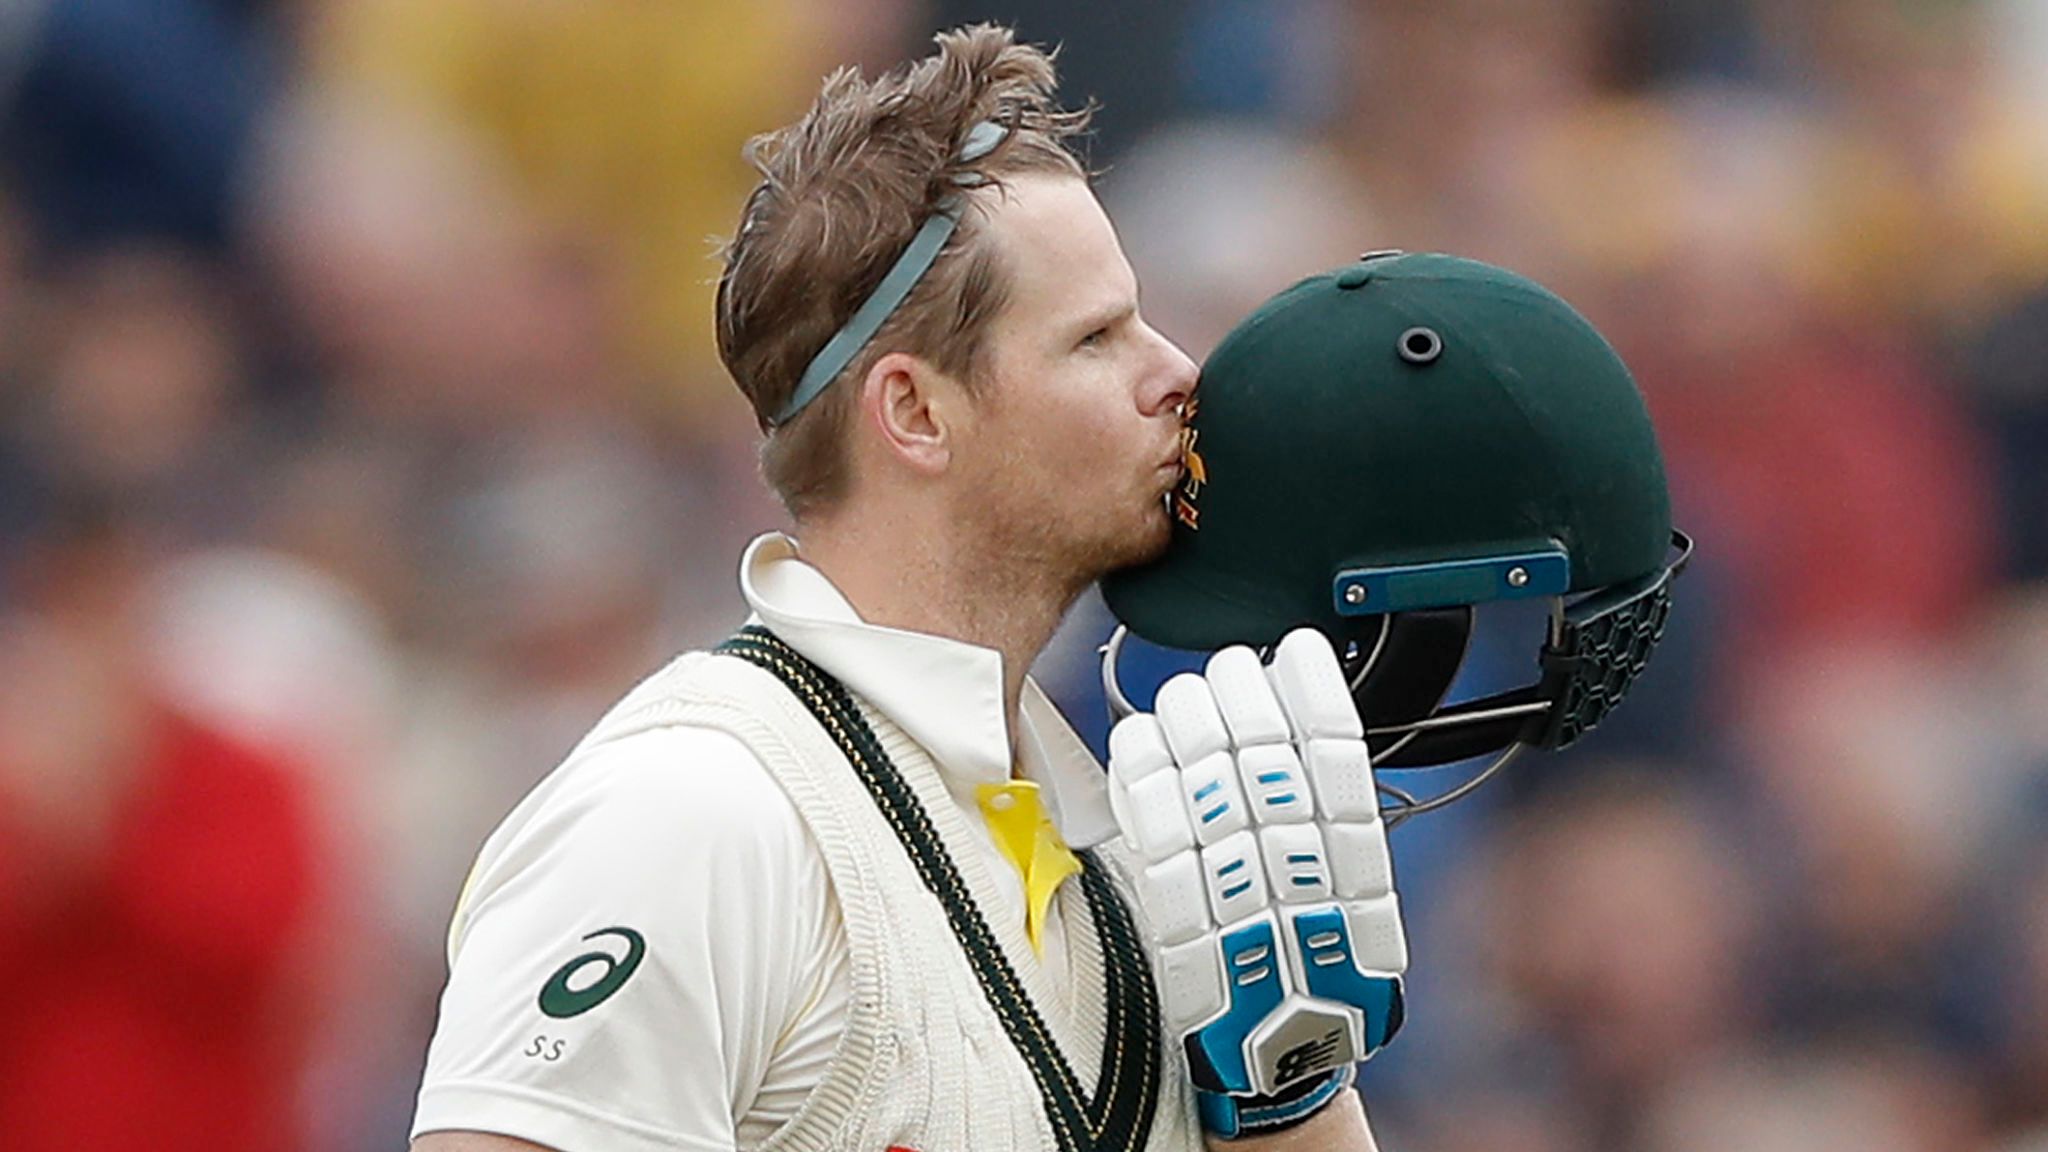 Steve Smith has become the first batsman to score more than 600 runs in Tests this year - if luck would have broken the record of this big batsman